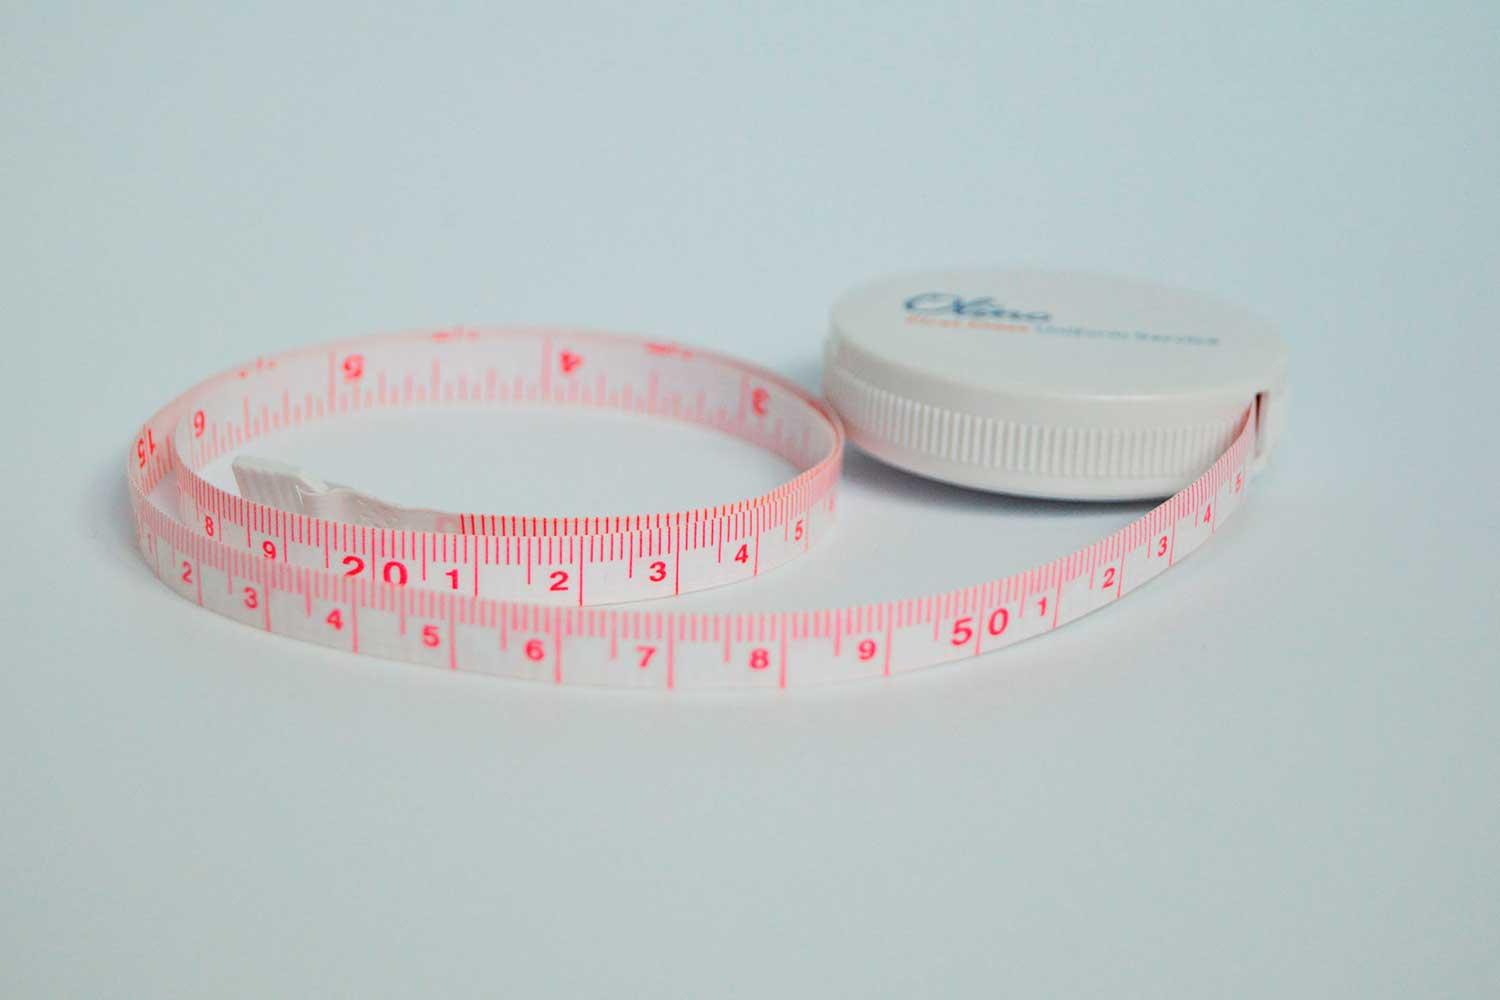 Olino measuring tape for fitting and sizing of uniforms